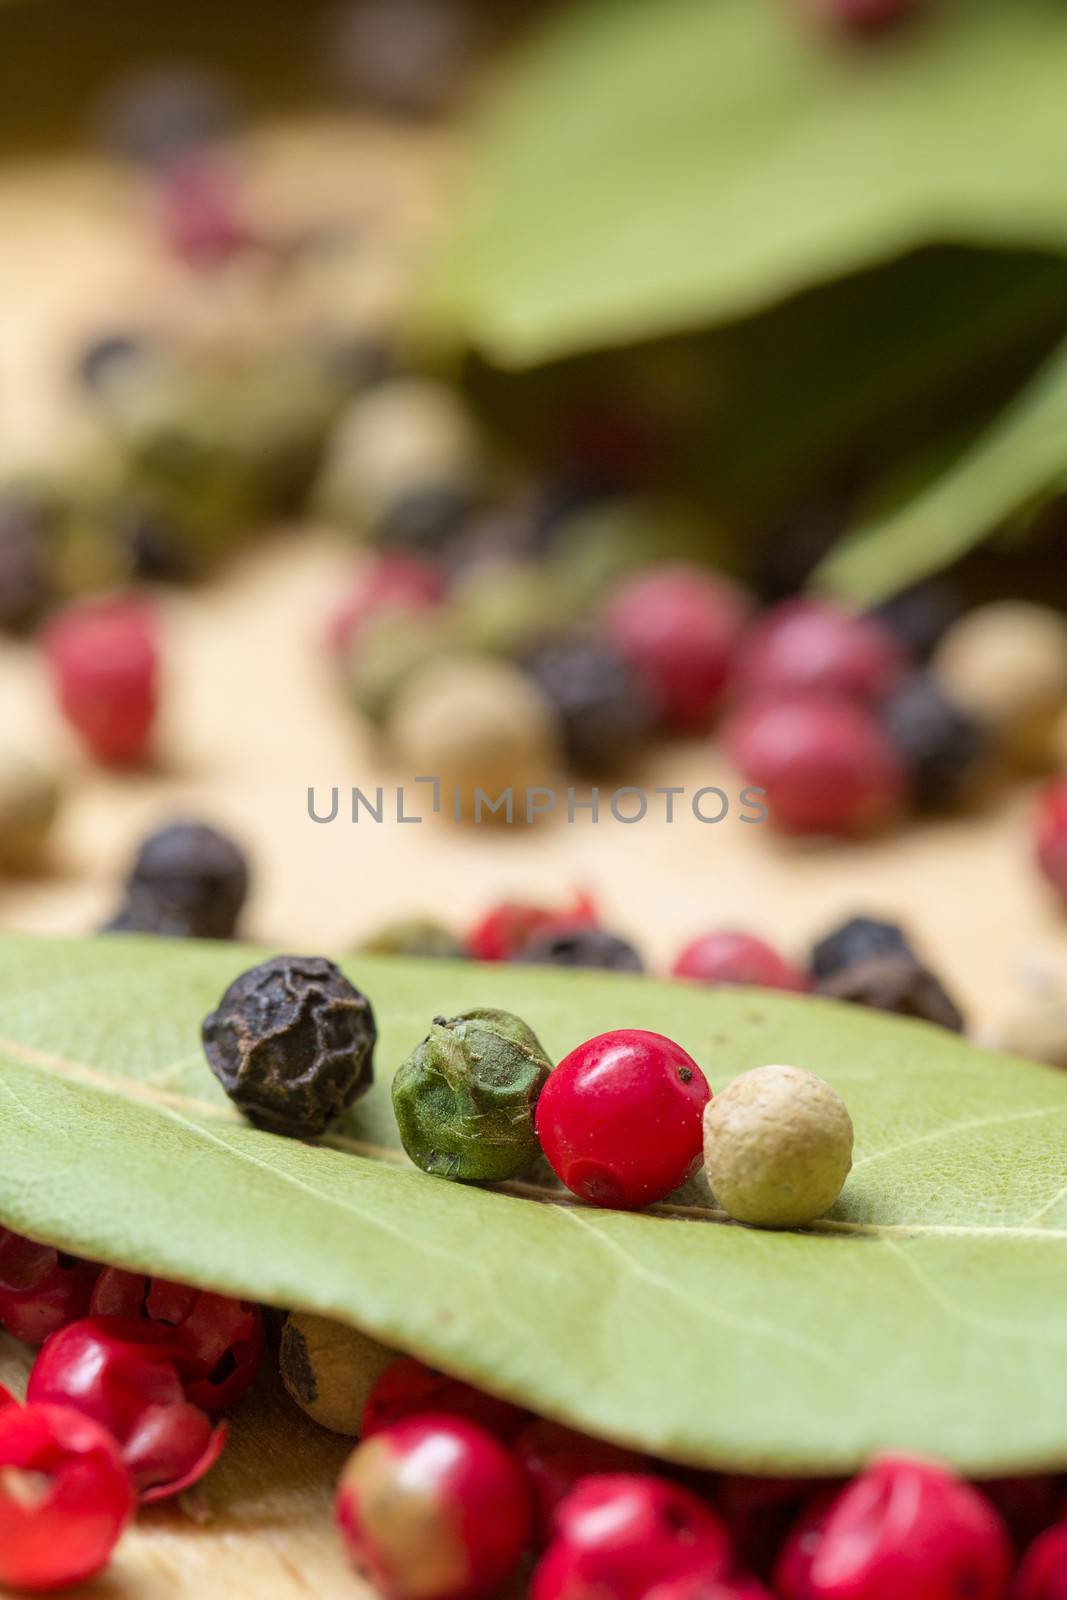 Dry bay laurel leaf with multicolored peppercorn closeup on wooden background